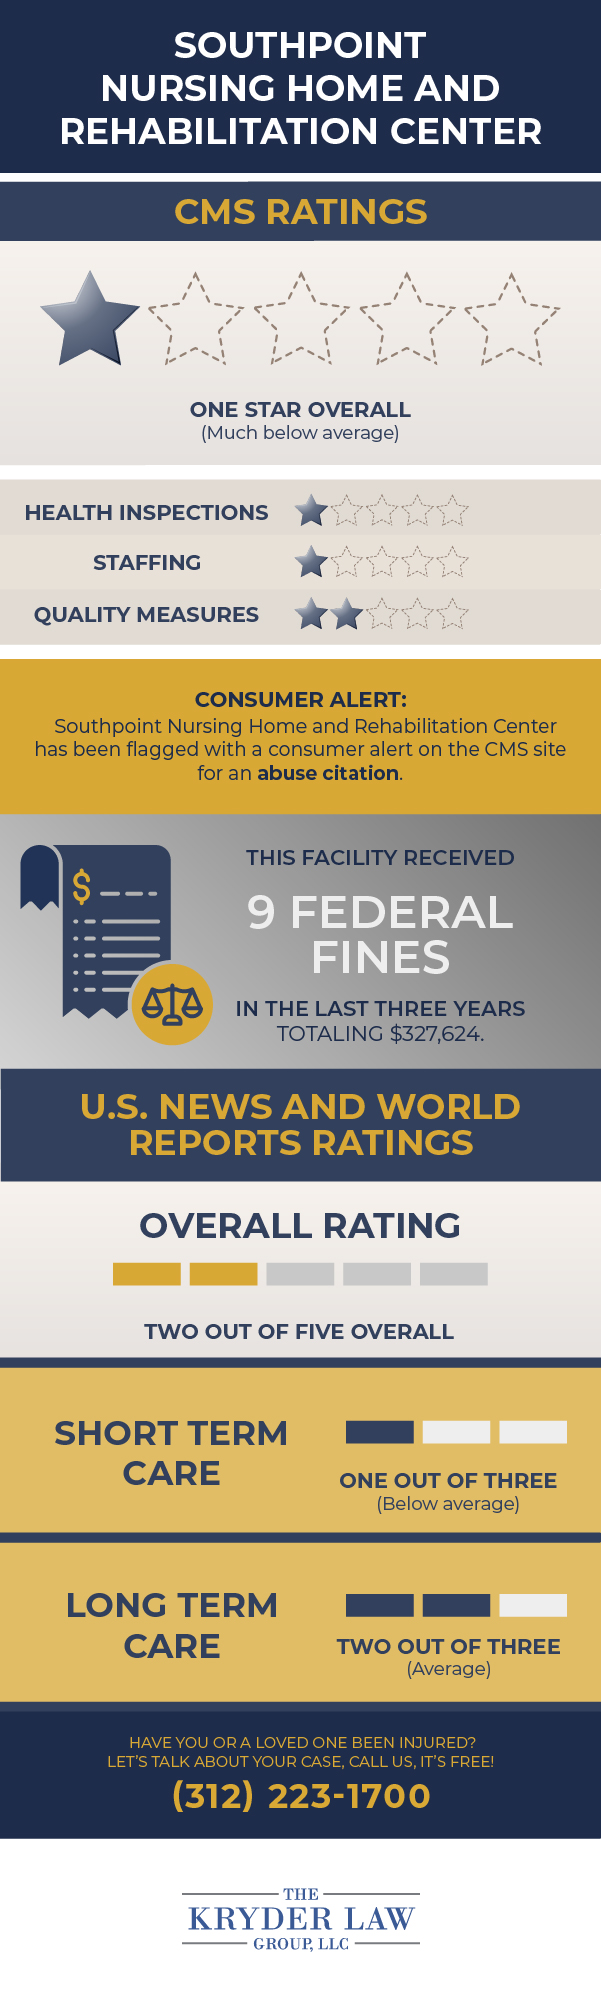 Southpoint Nursing Home and Rehabilitation Center CMS Ratings and U.S. News and World Reports Ratings